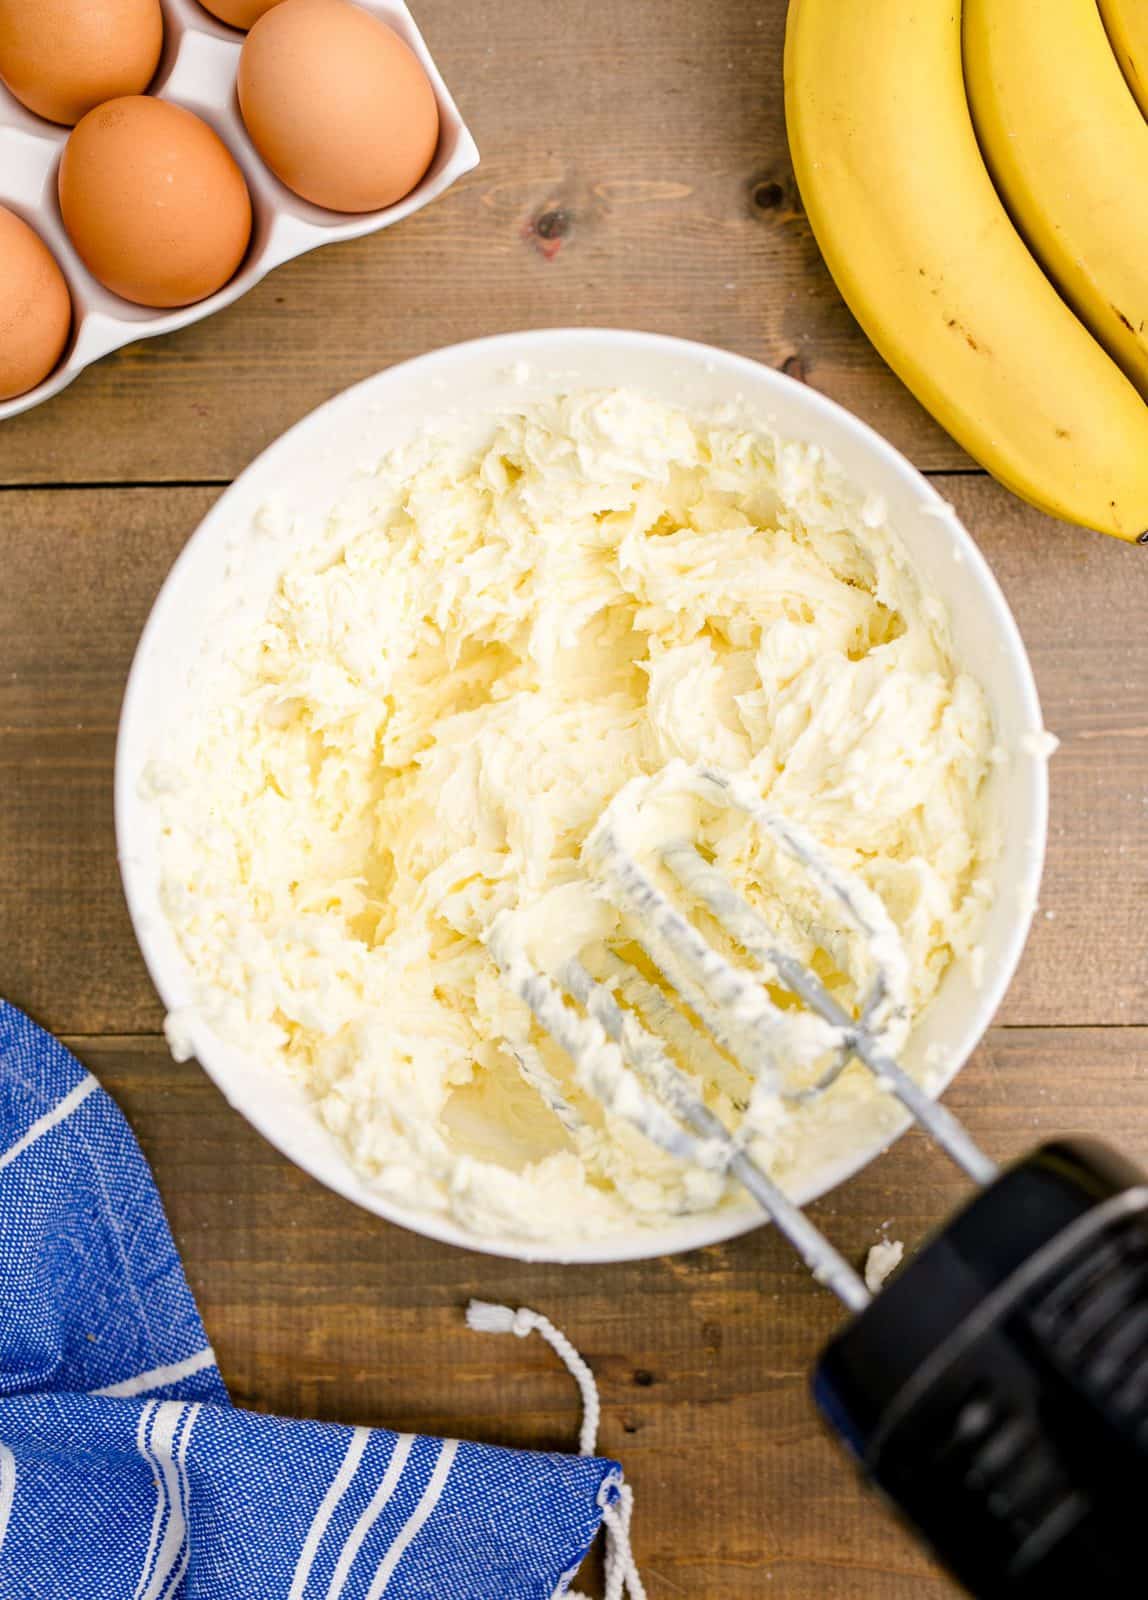 Cream cheese and sugar blended together in white bowl with a handheld electric mixer.